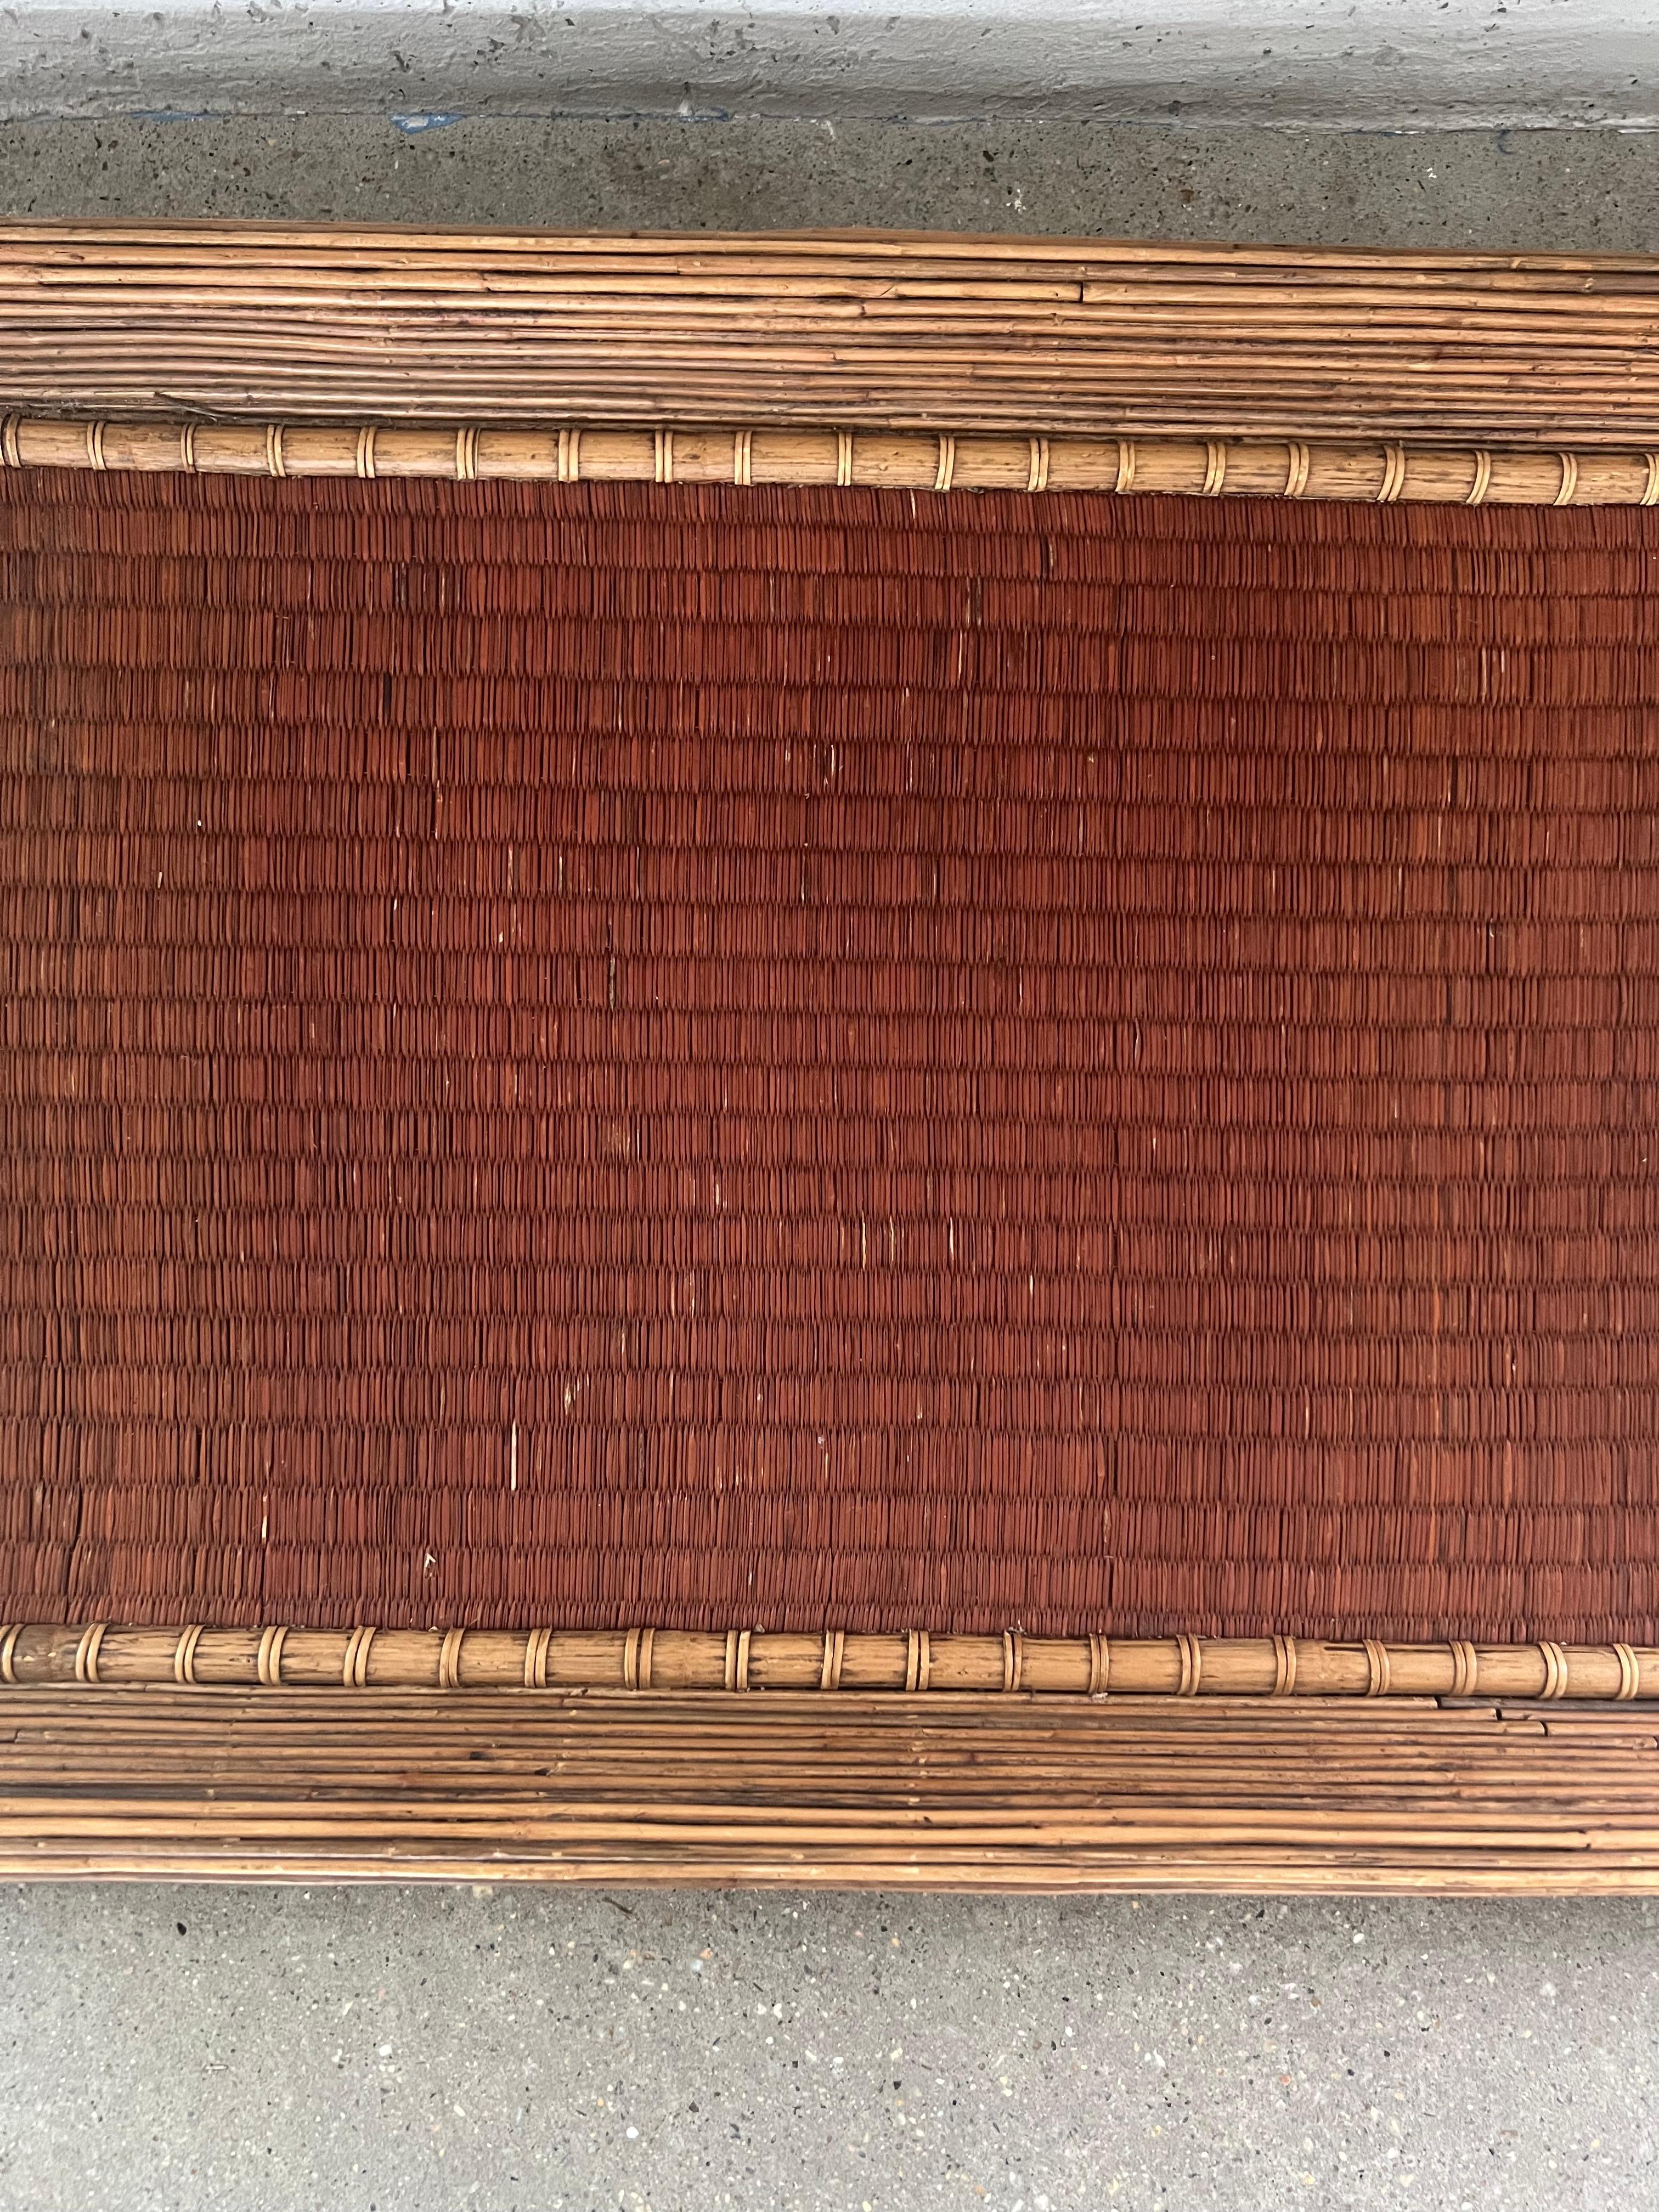 1920s Extra Long Japanese Bamboo Tray In Good Condition For Sale In Chicago, IL